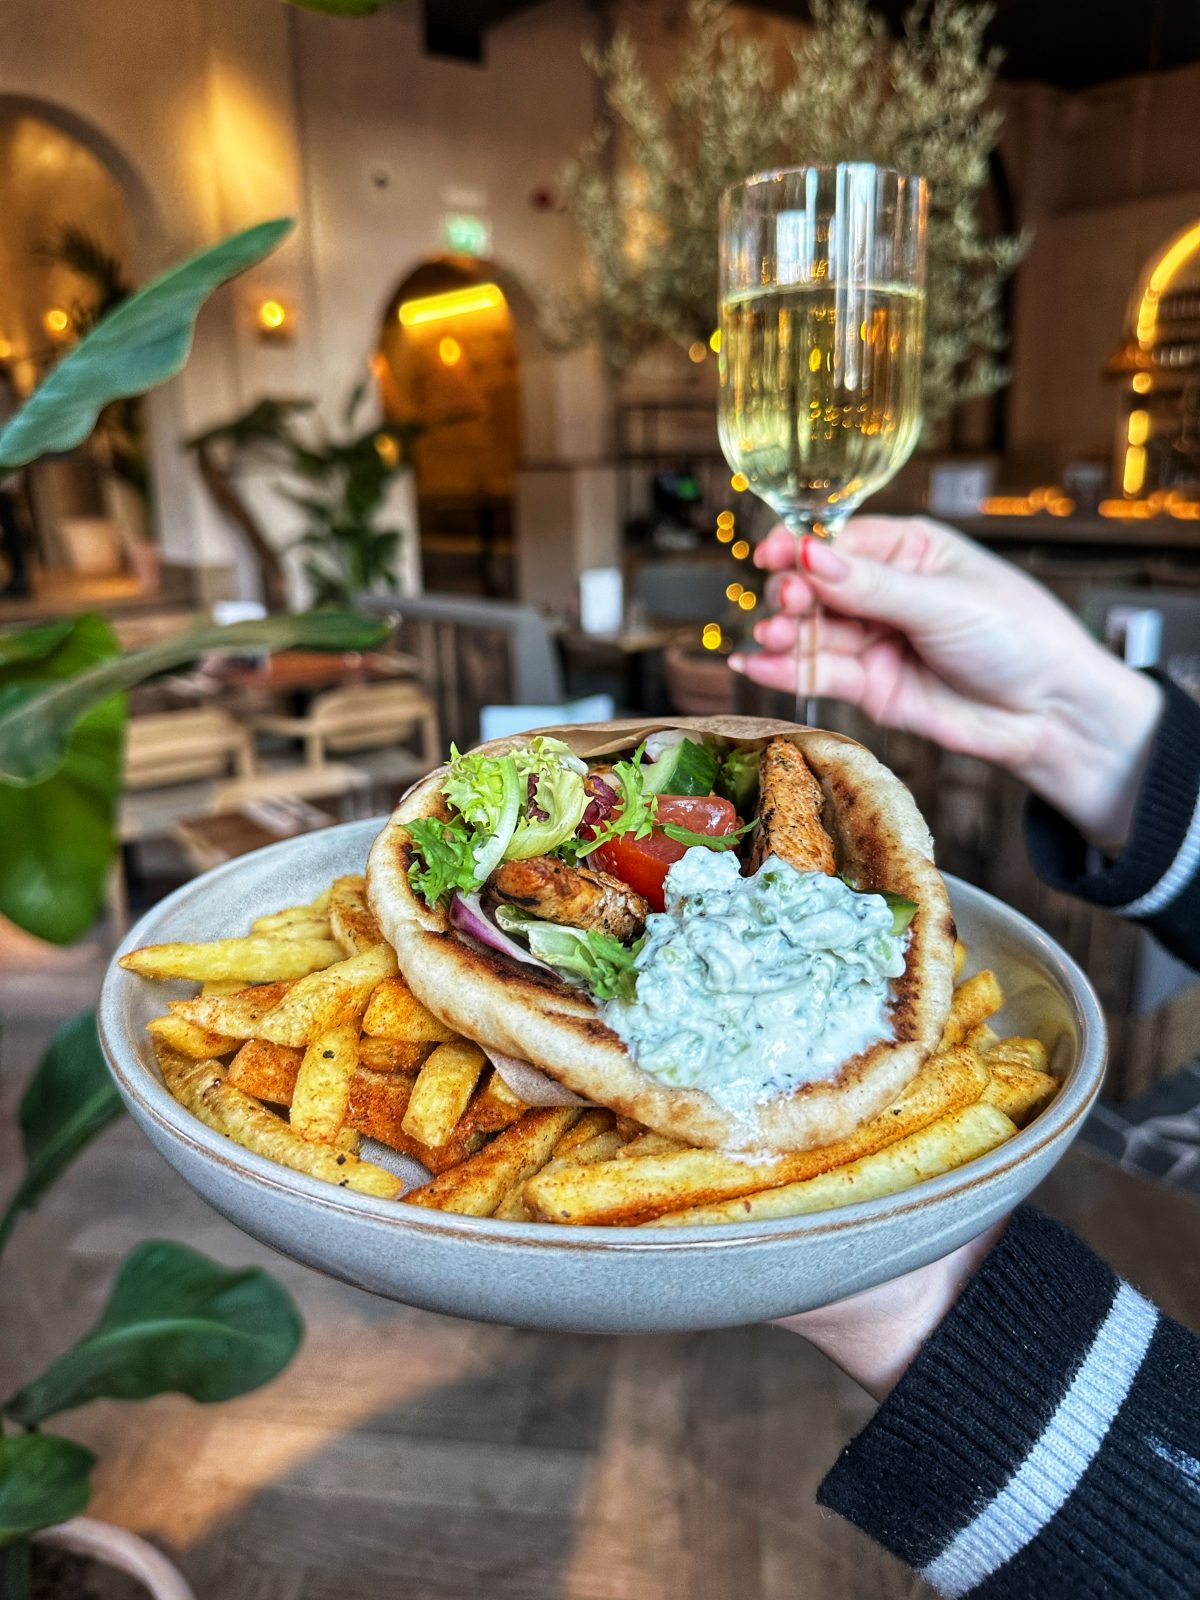 gyros and chips with a glass of wine.